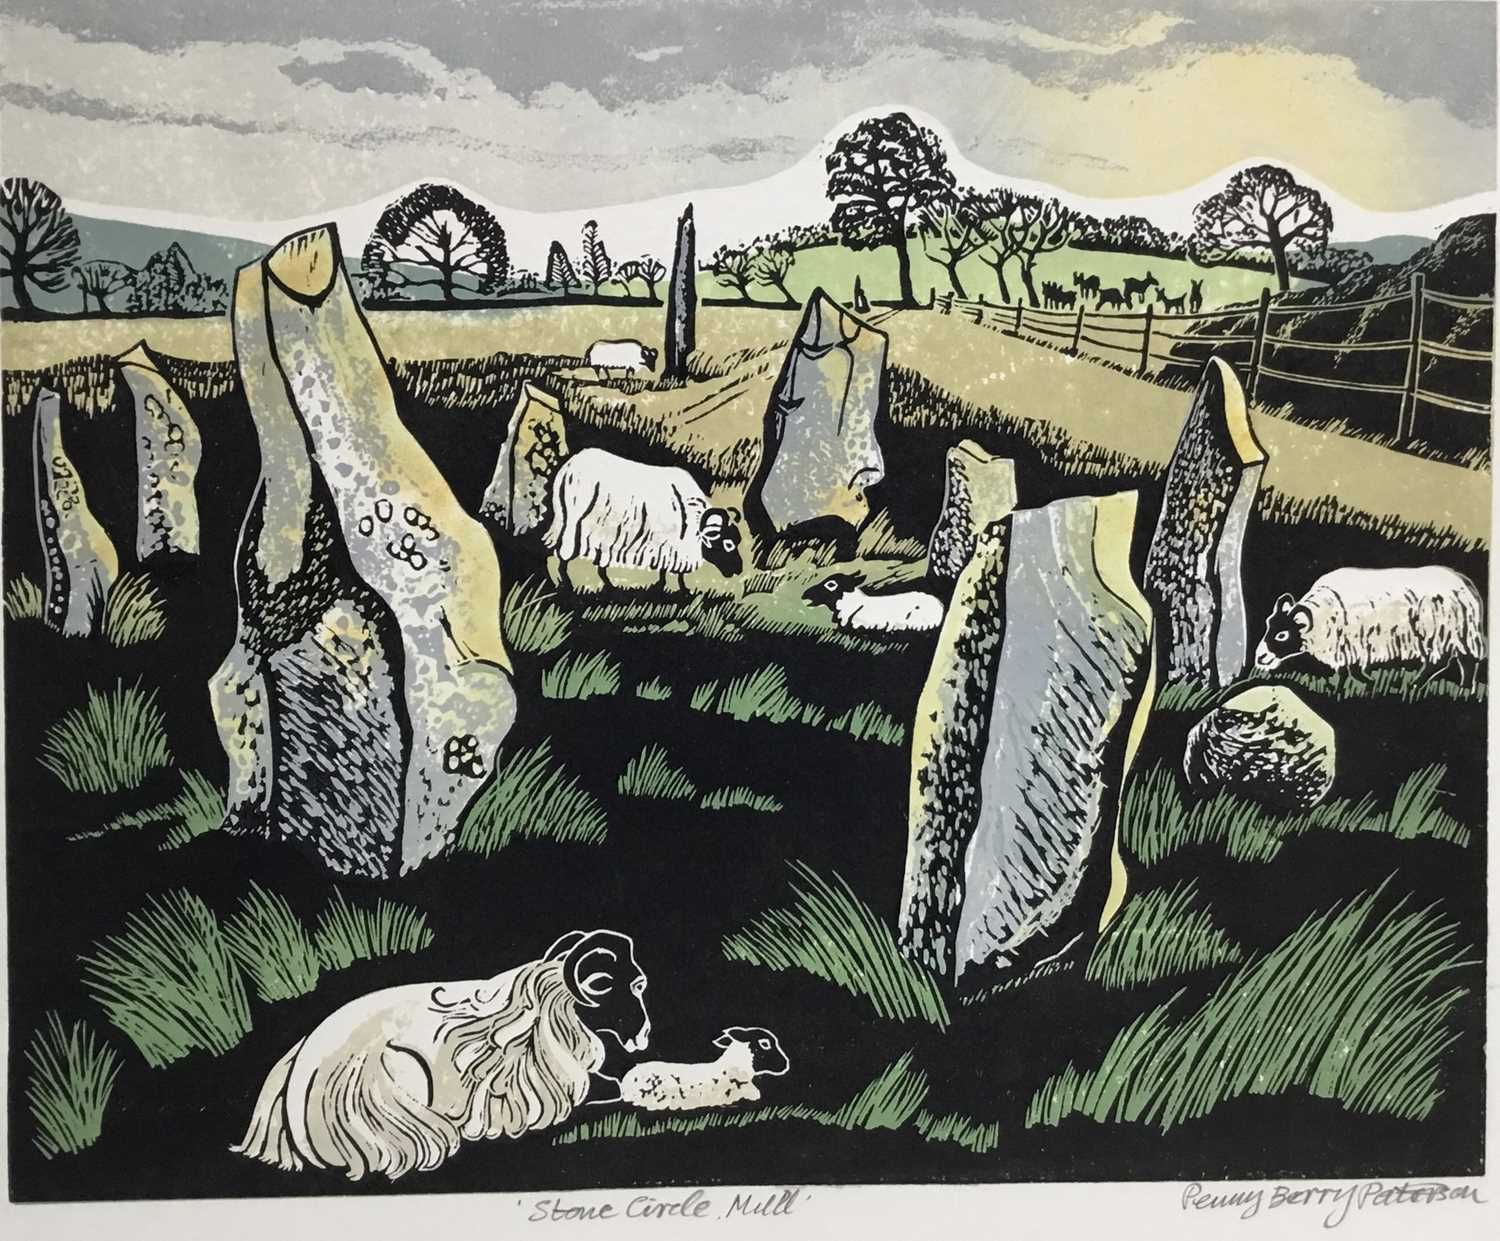 Lot 187 - Penny Berry Paterson (1941-2021) colour linocut print, Stone circle, Mull, signed and numbered H/C, 28 x 34cm